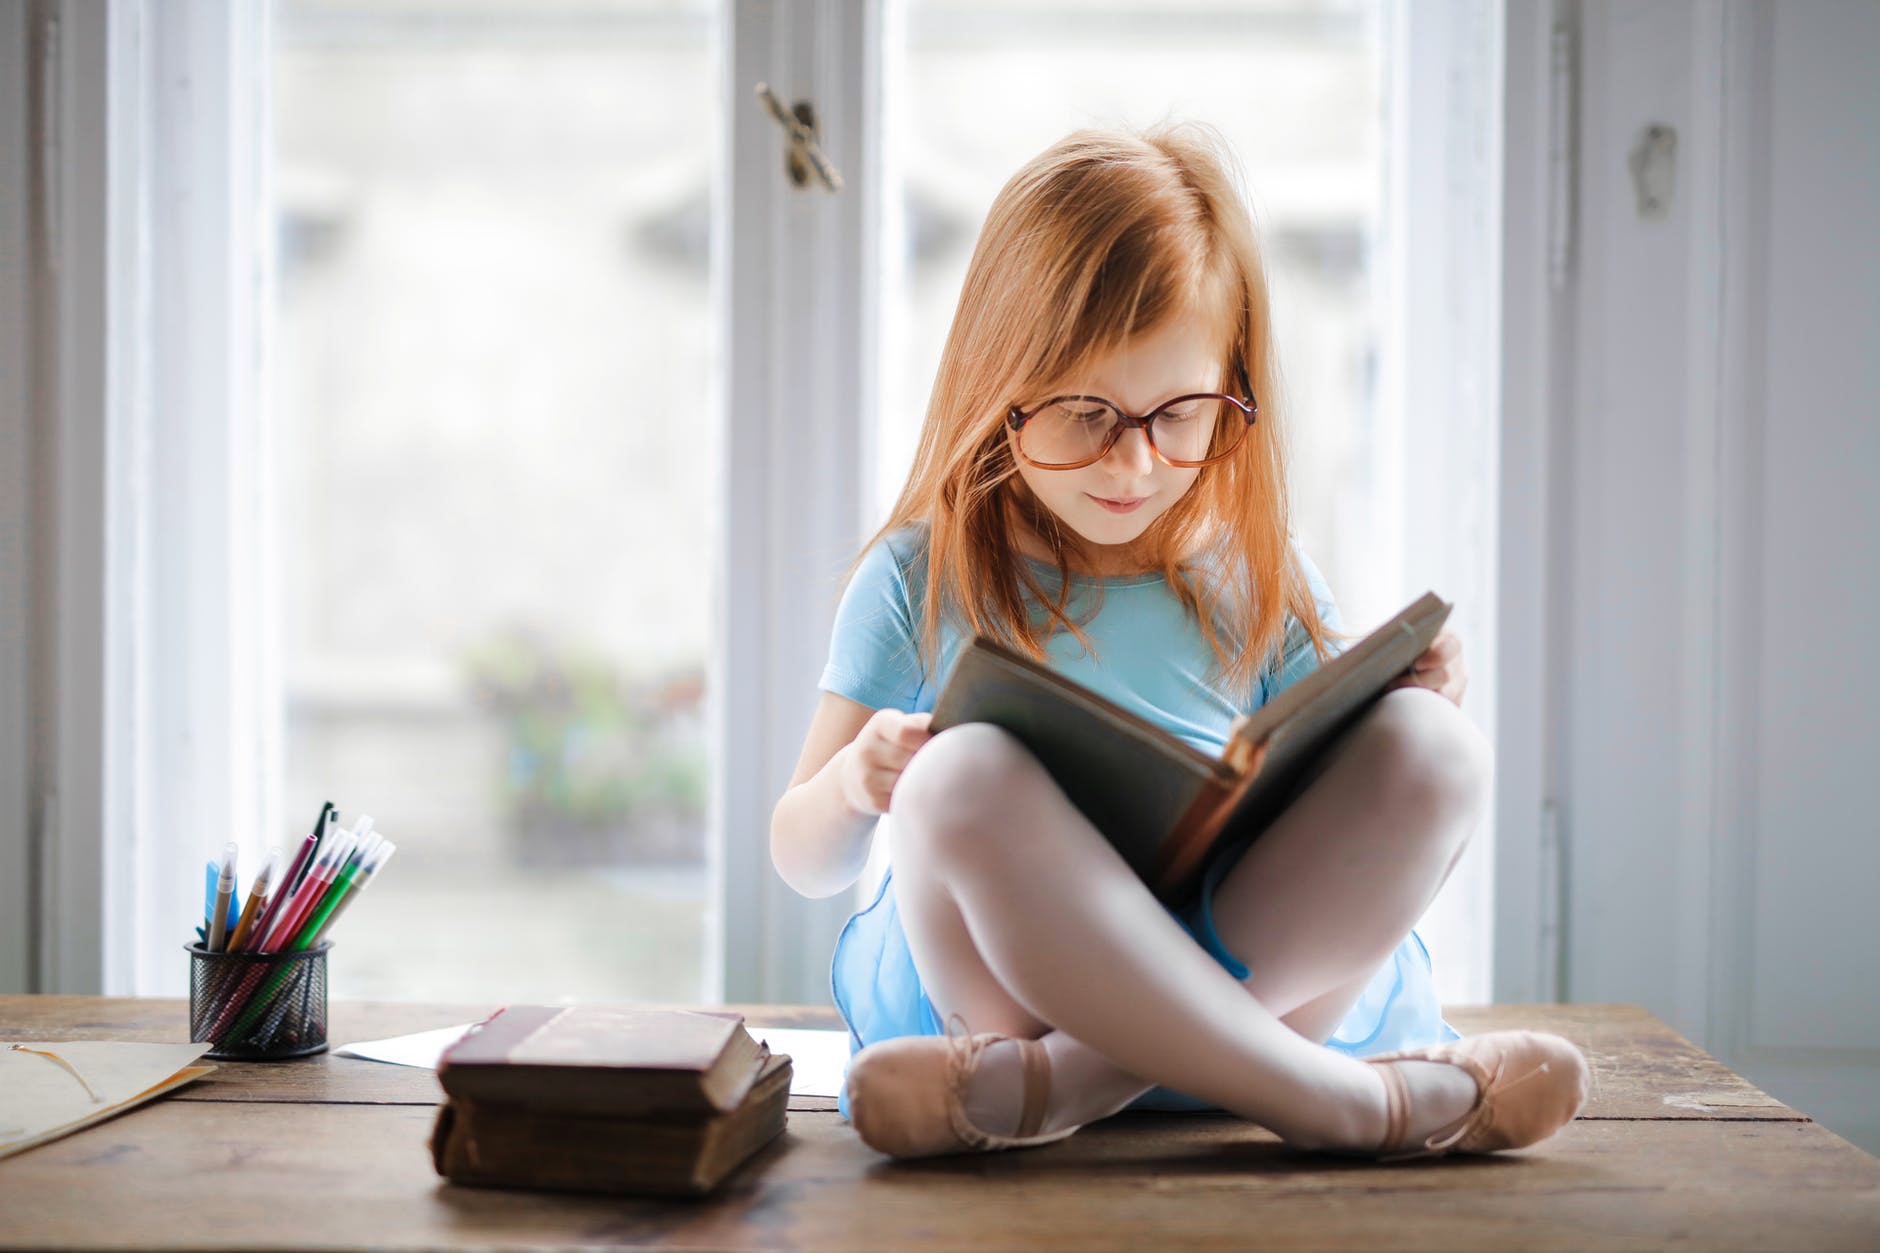 photo of young girl with red hair readng a book